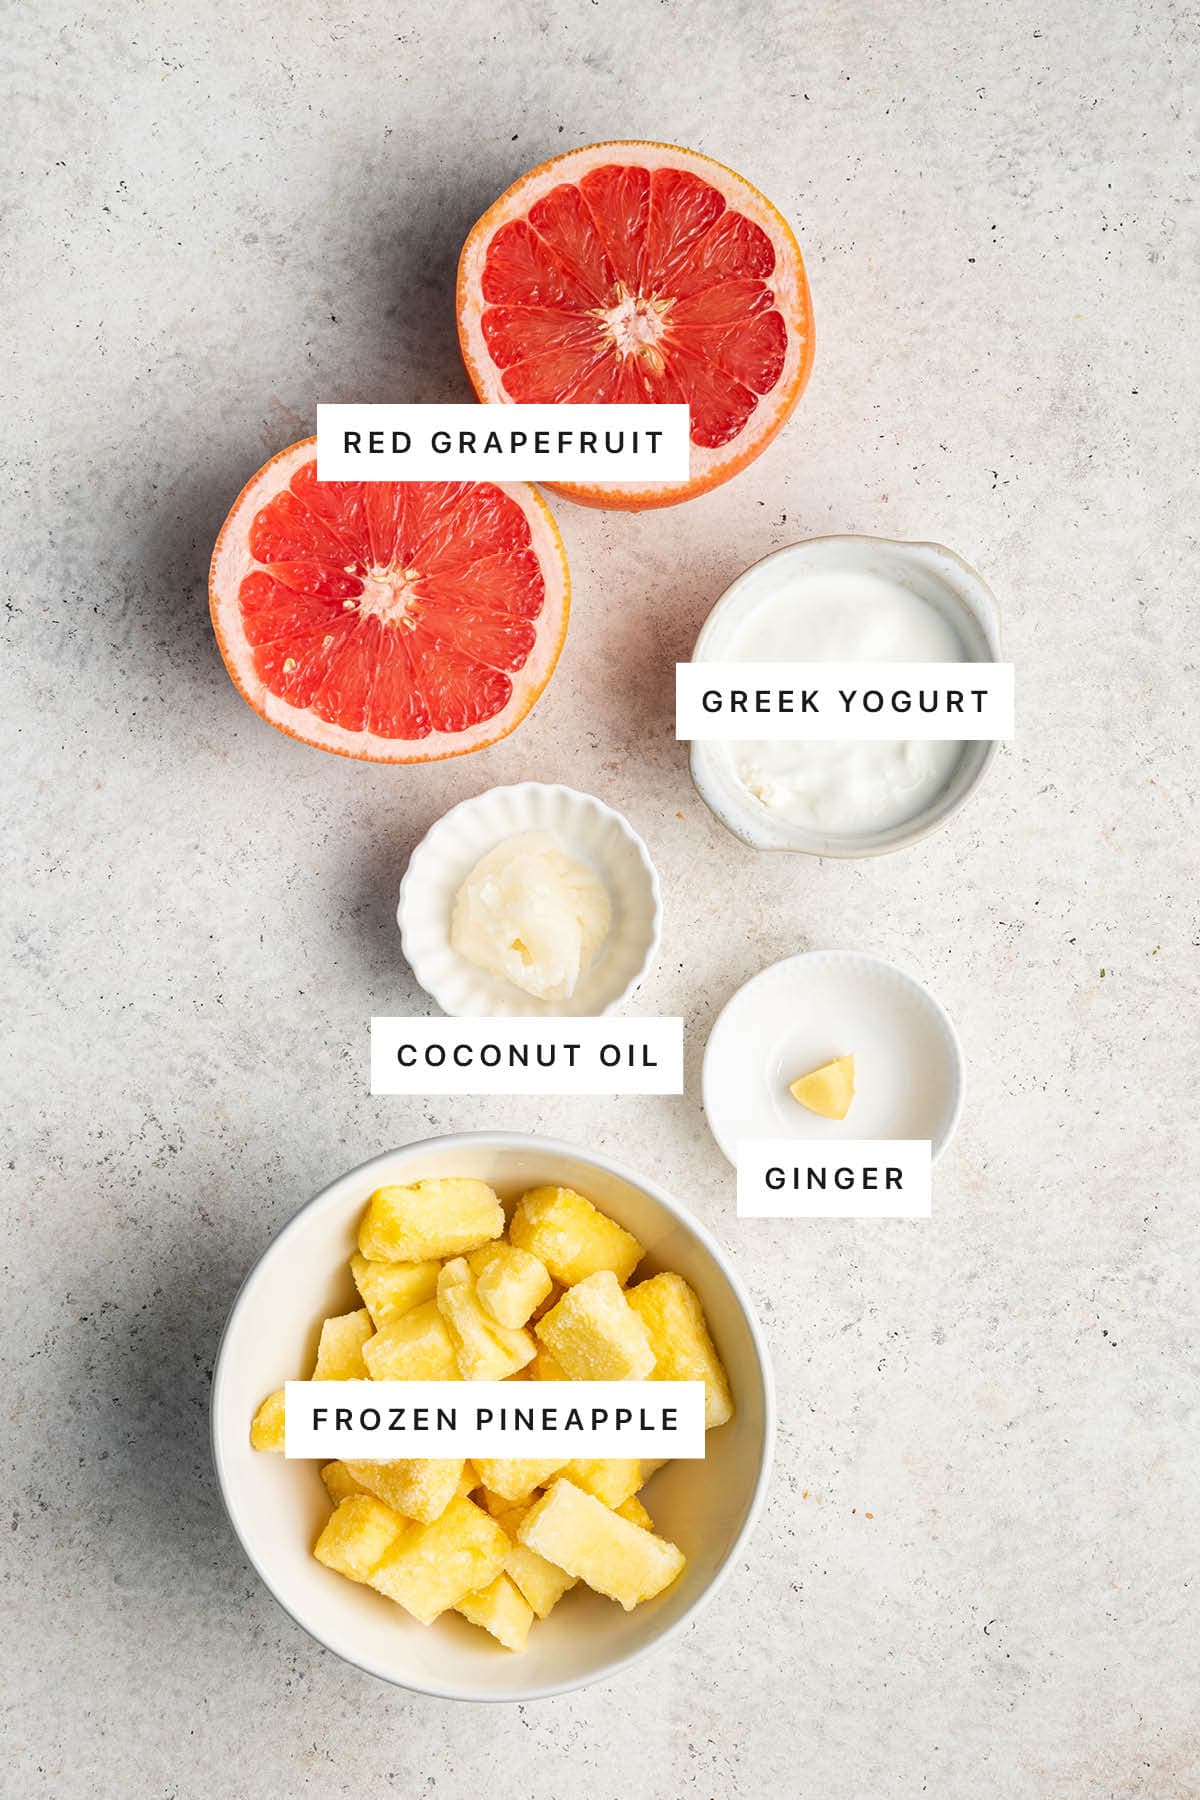 Ingredients measured out to make a Grapefruit Smoothie: red grapefruit, Greek yogurt, coconut oil, ginger and frozen pineapple.